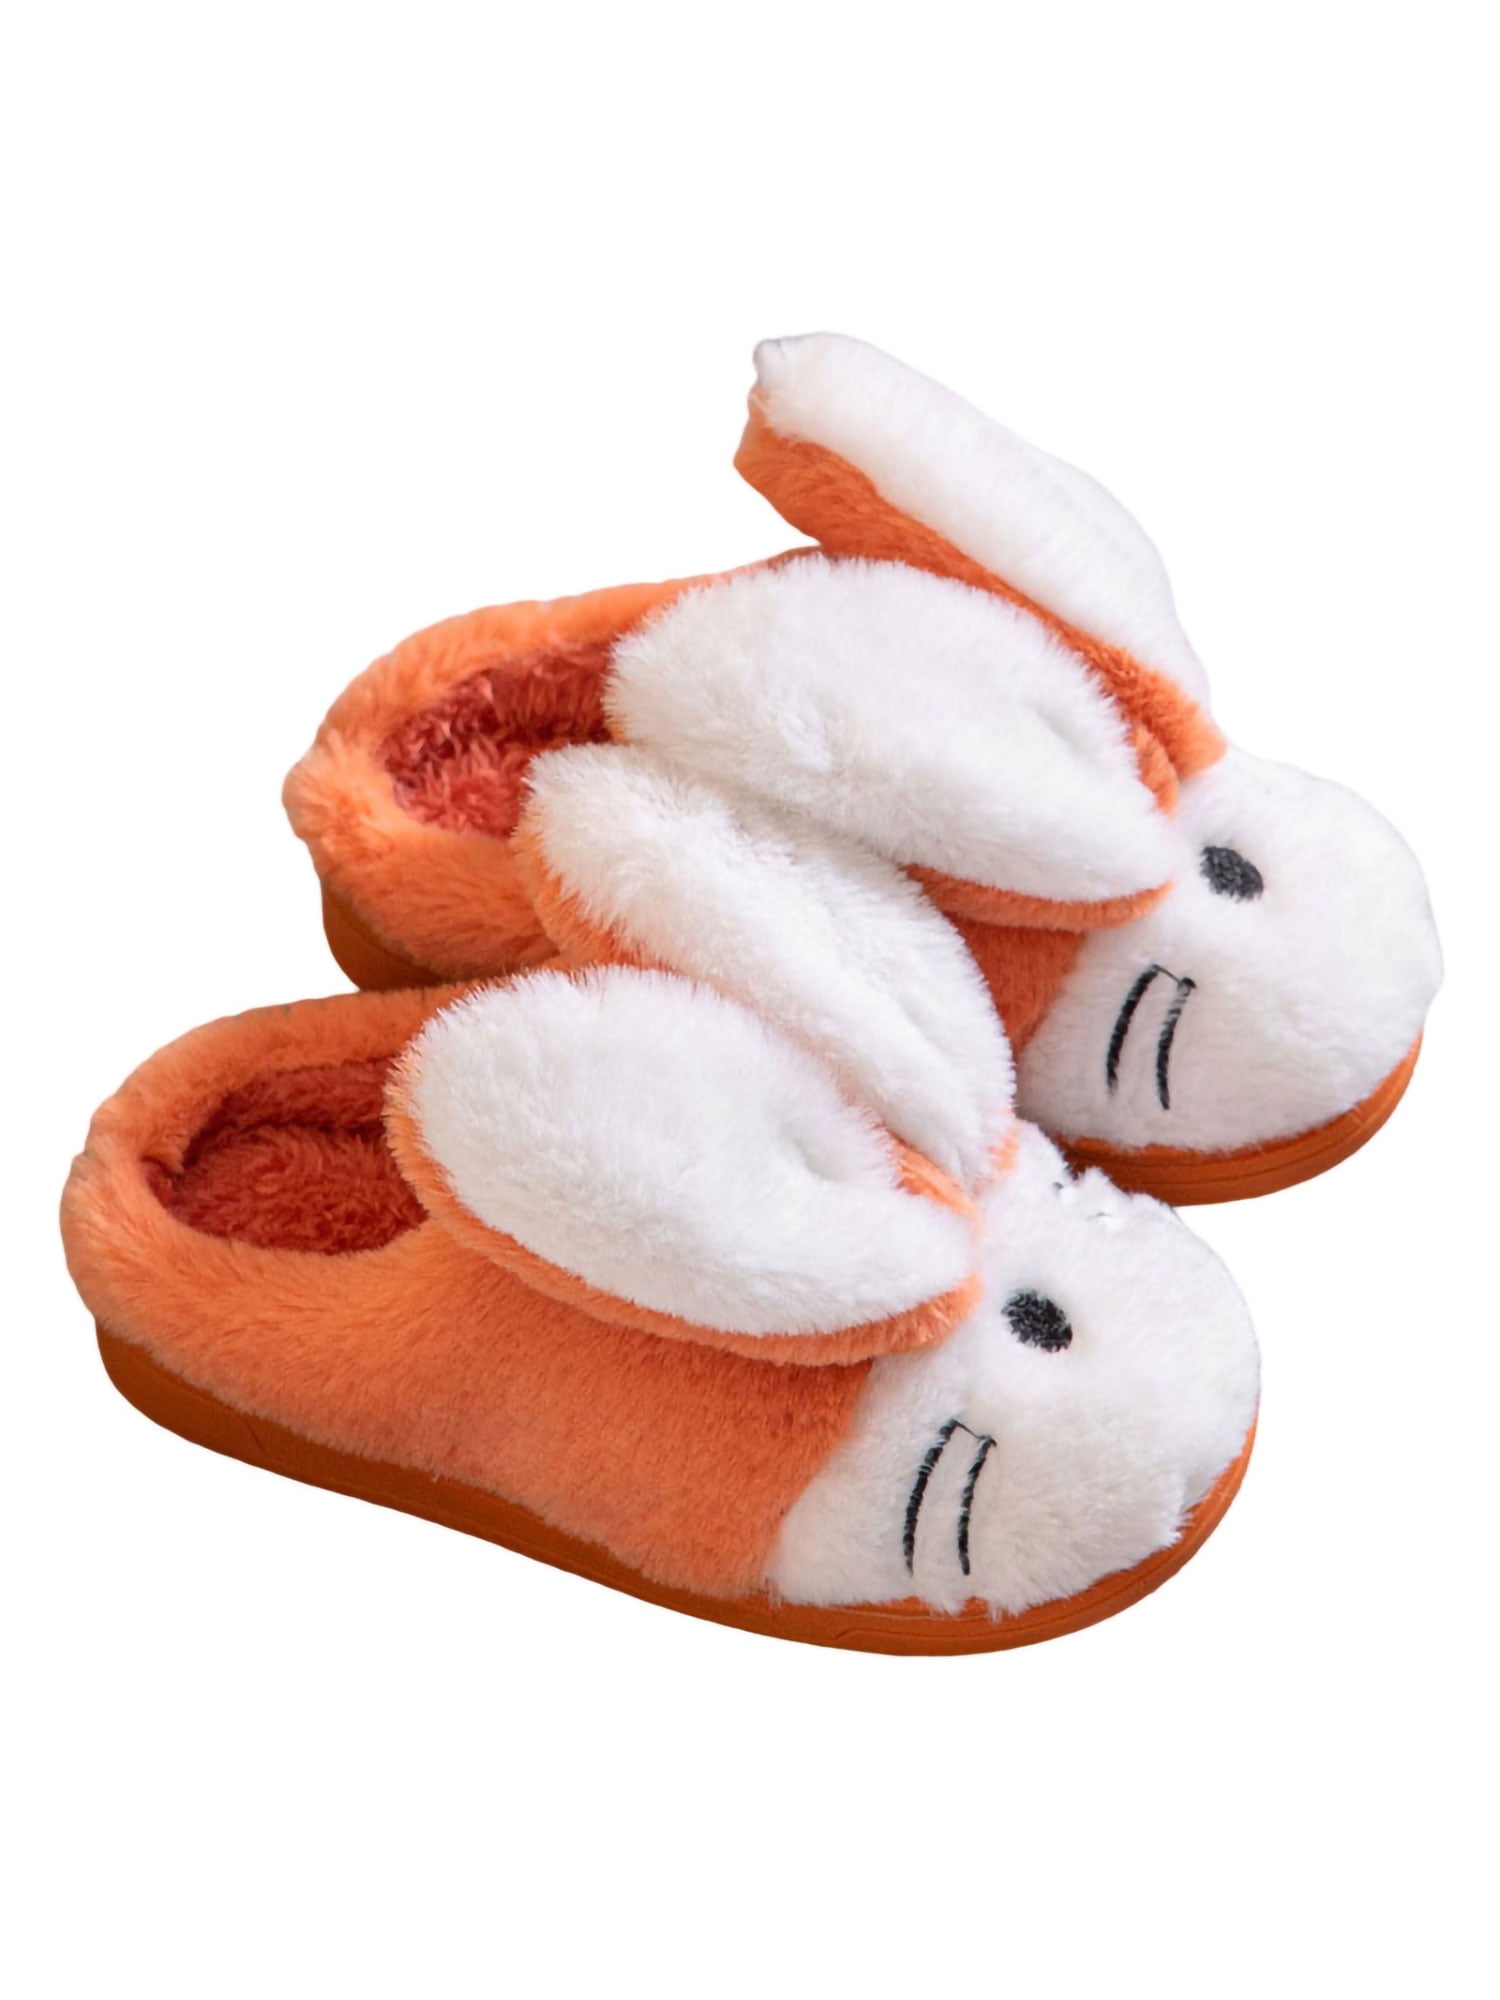 Kids 3D Character Slippers Boys Girls Novelty Nursery House Shoes Booties Size 